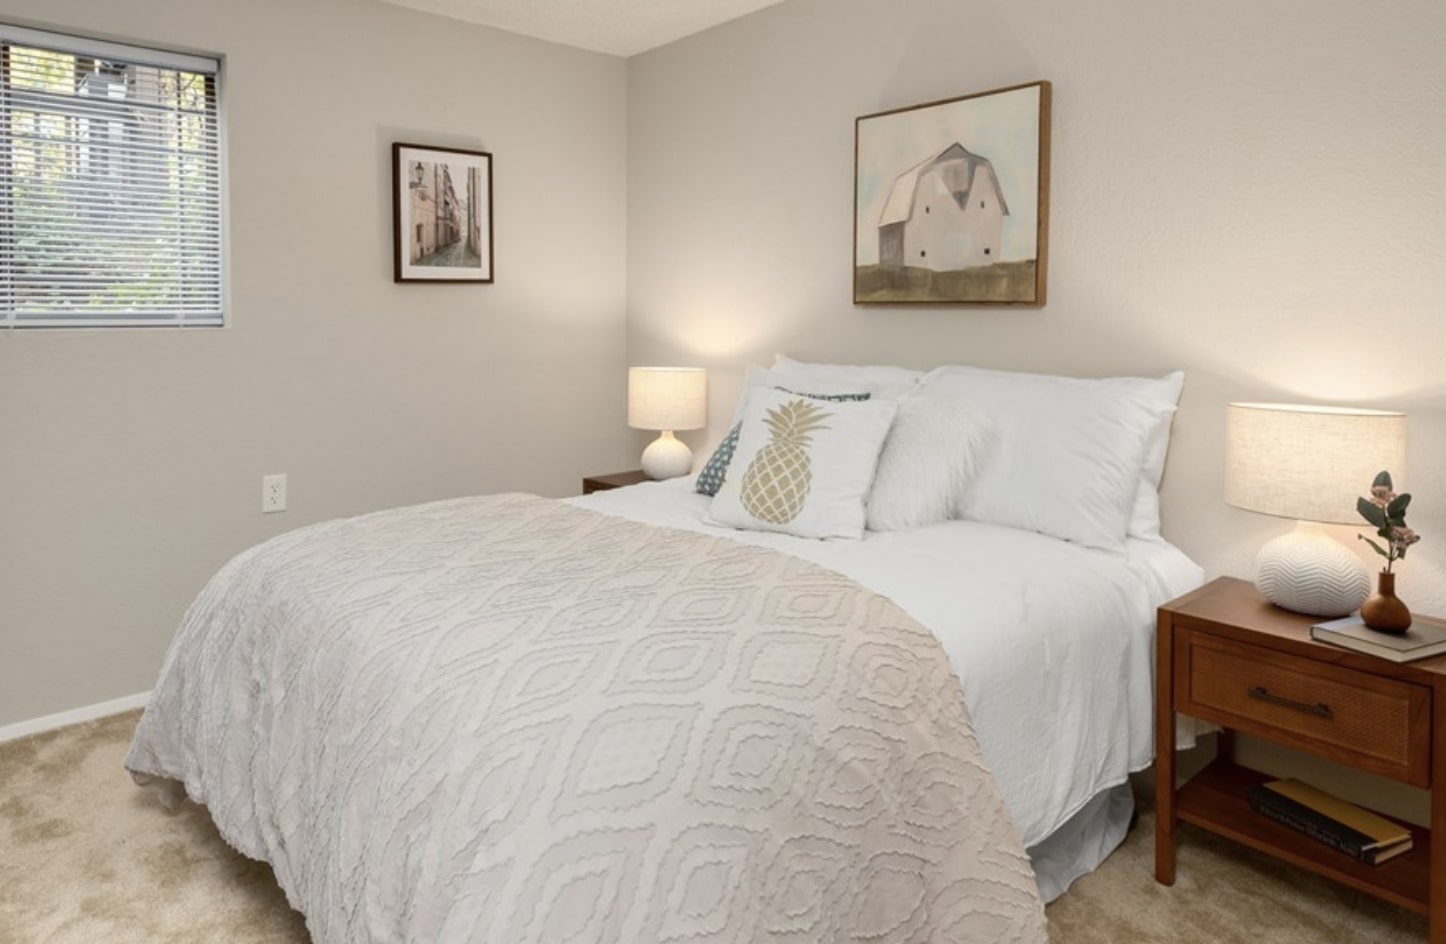 The guest bedroom features neutral yet playful style